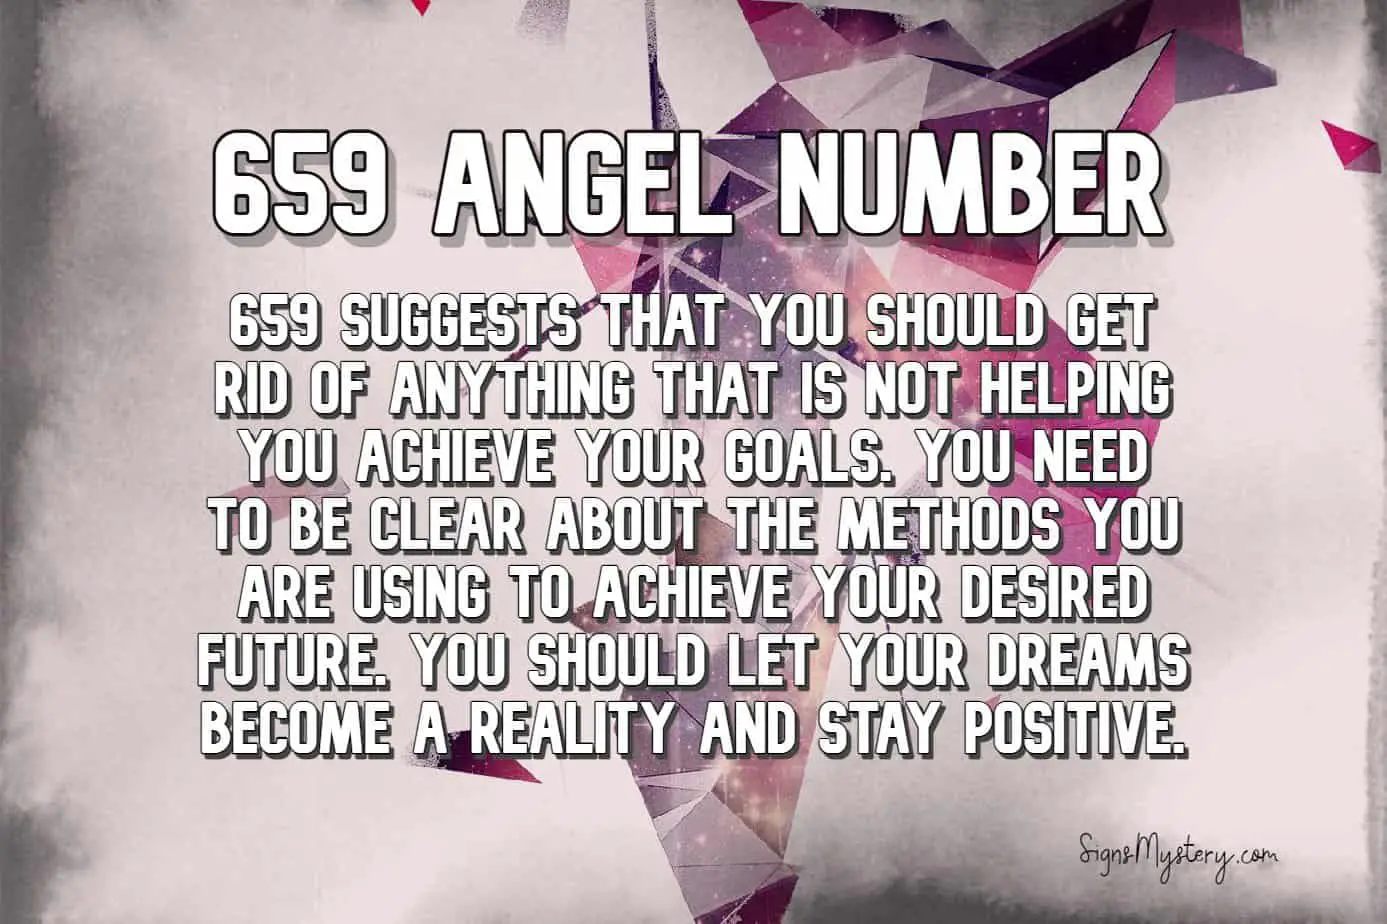 659 angel number meaning